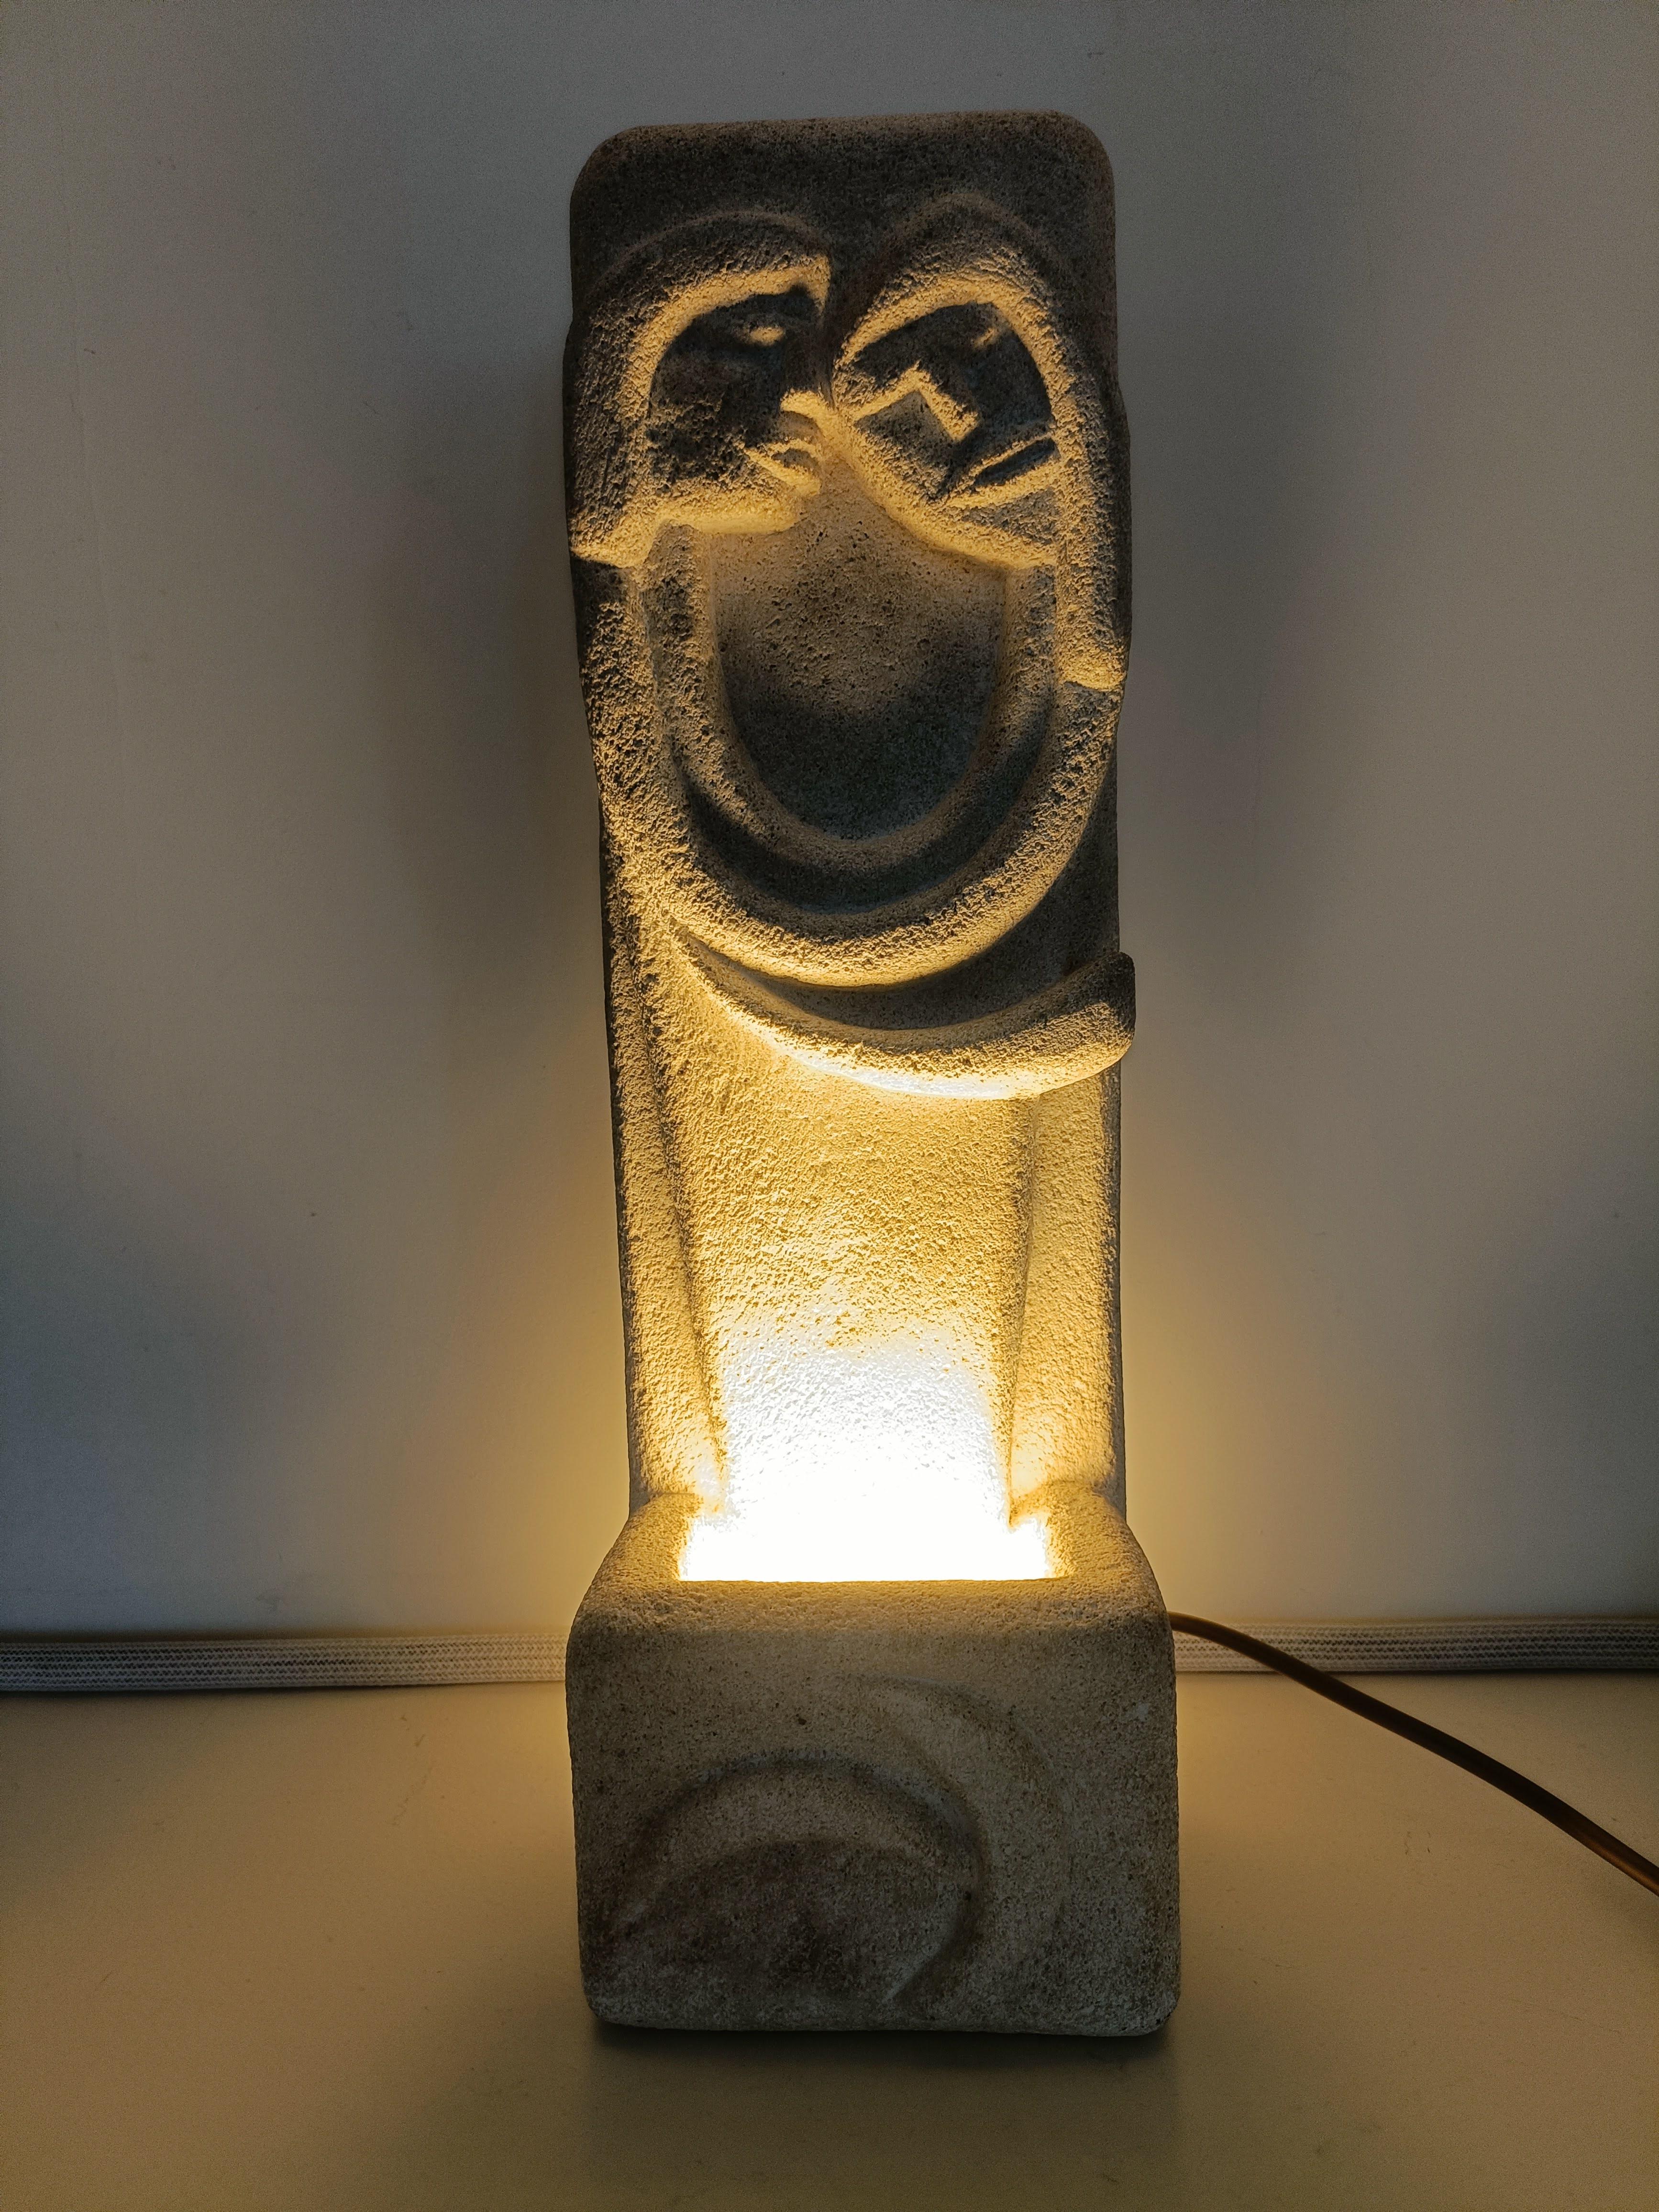 Superb Albert Tormos lamp 40 cm high and 12 cm wide ; maximum depth : 11 cm.
.
Rare.
.
Signed.
.
In perfect condition, no lack.
.
In Gard stone.
.
The diffused light is sublime; The pictures speak for themselves.
.
It has a very poetic,